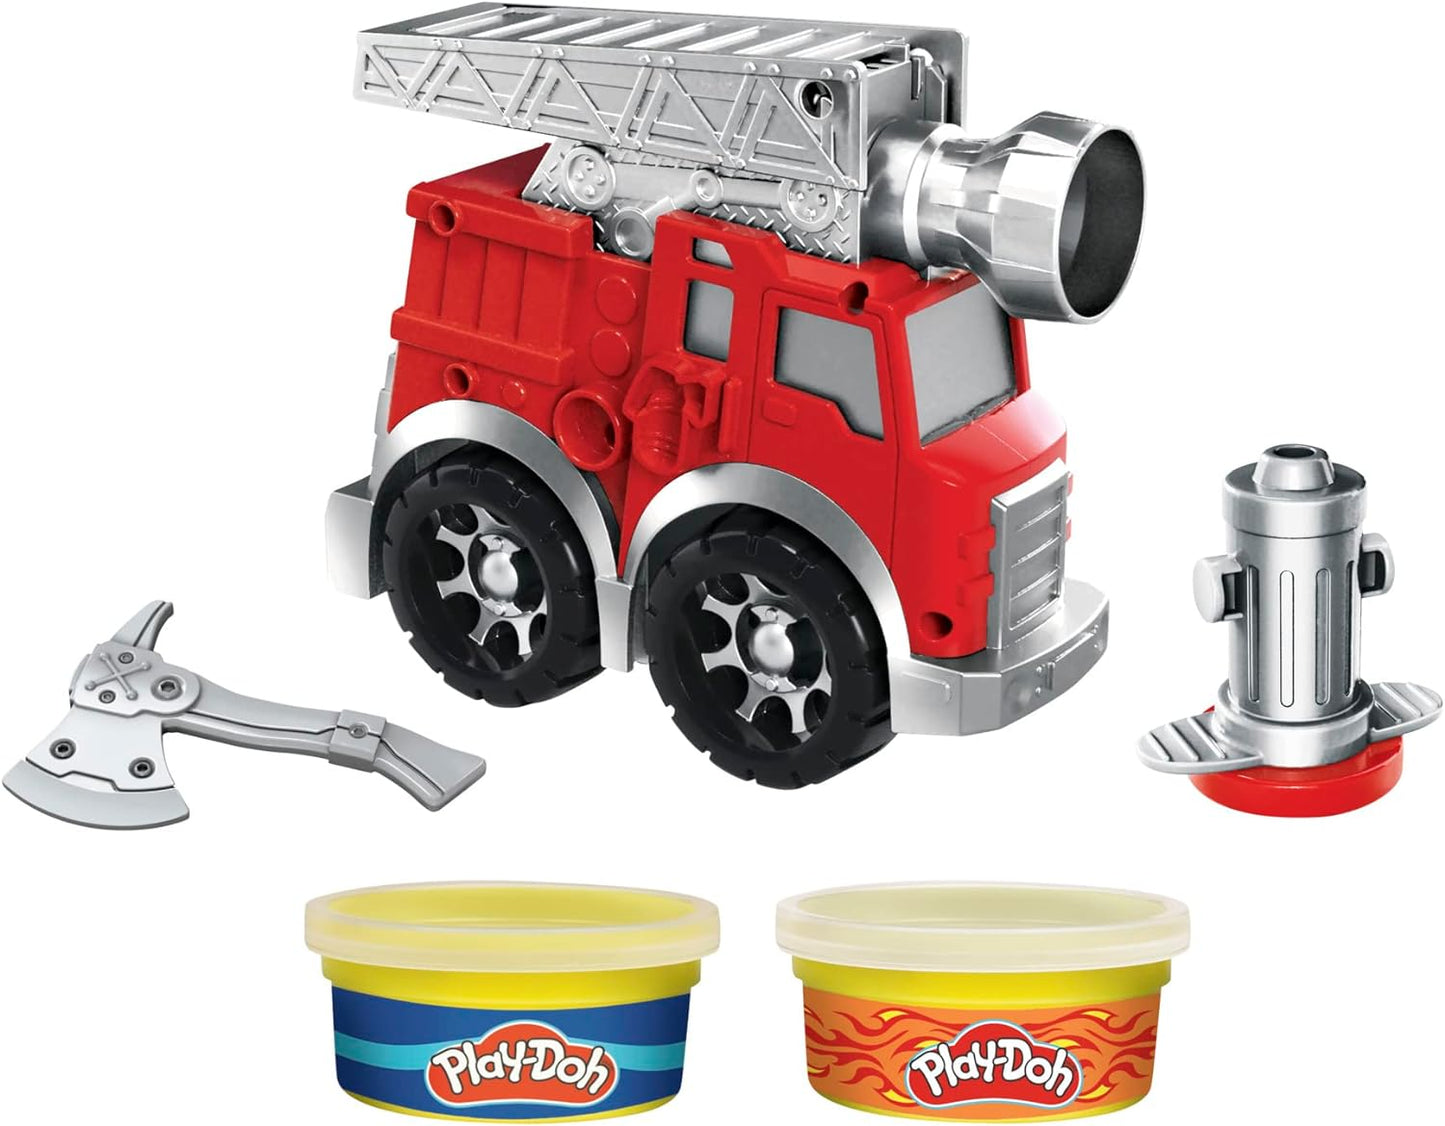 Play-Doh Wheels Fire Engine Playset with 2 Non-Toxic Modeling Compound Cans Including Water and Fire Colors, Firetruck Toy for Kids 3 and Up